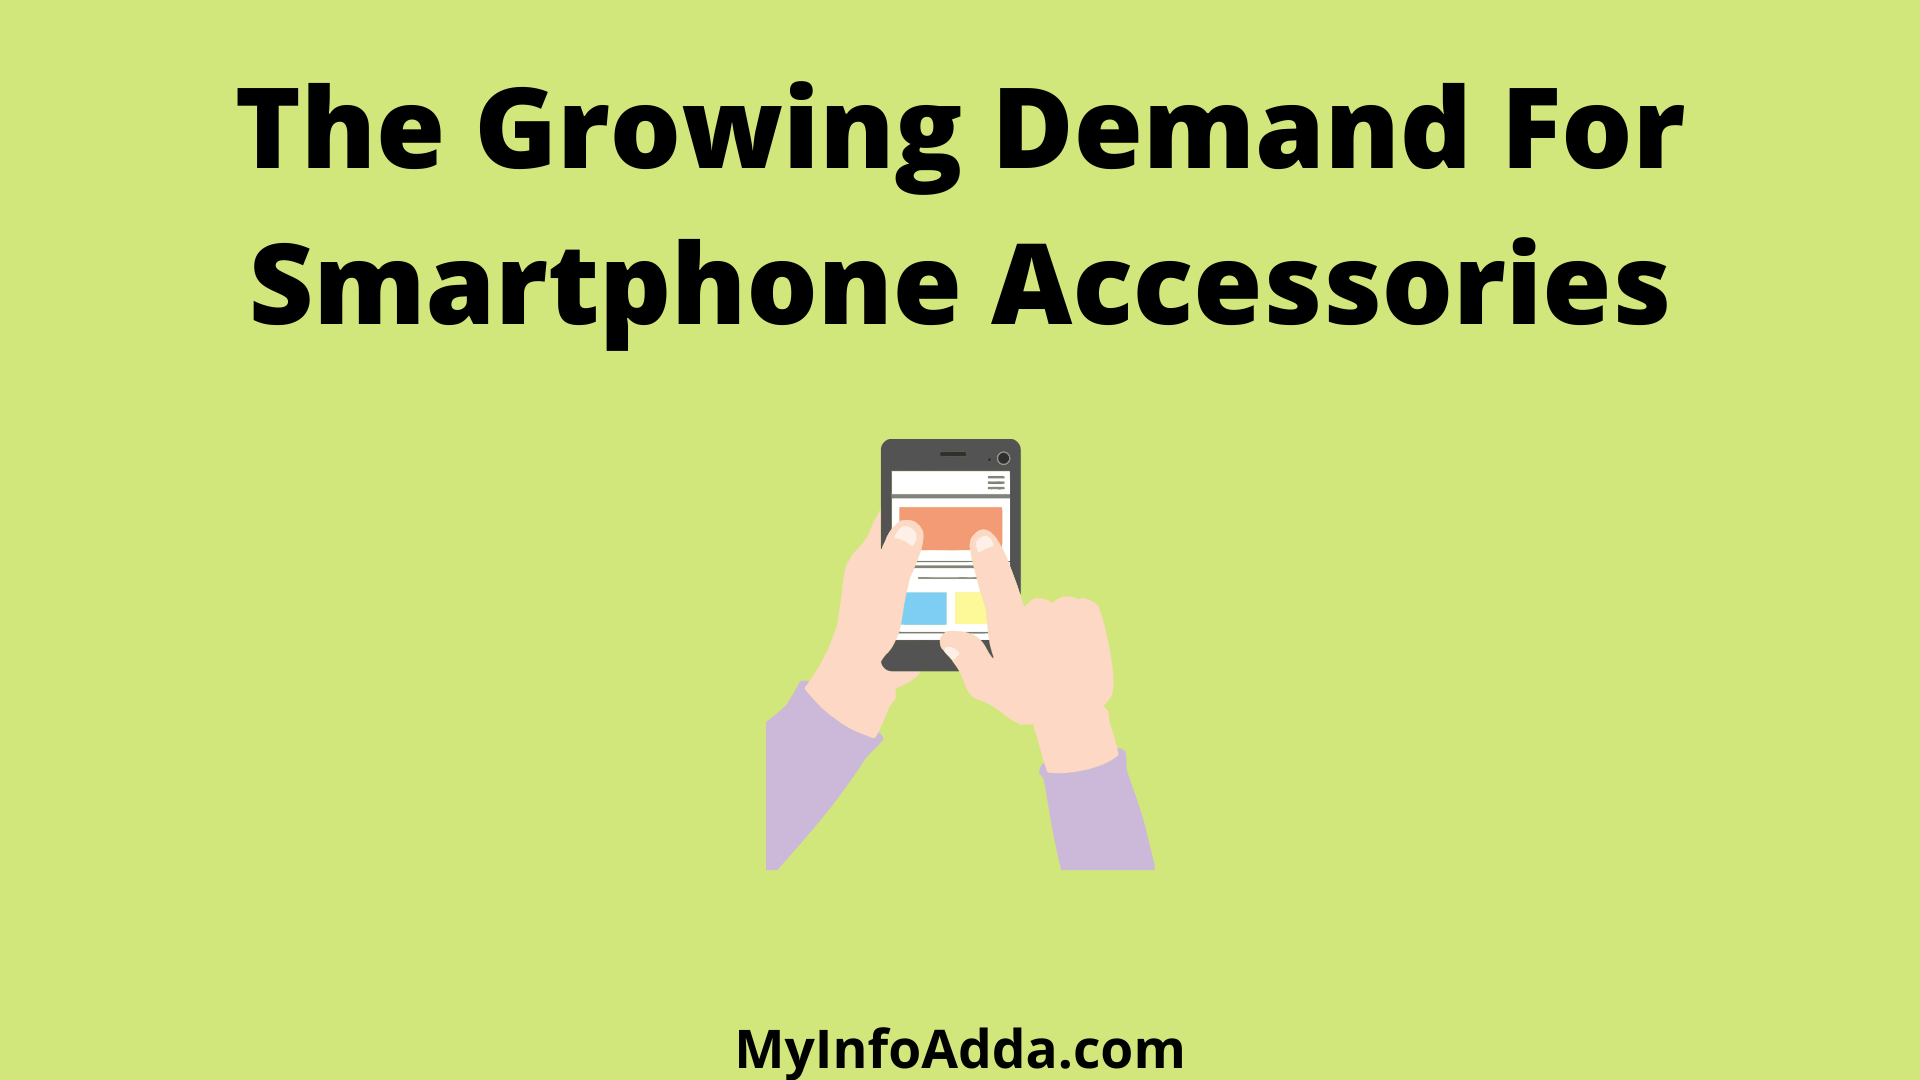 The Growing Demand For Smartphone Accessories